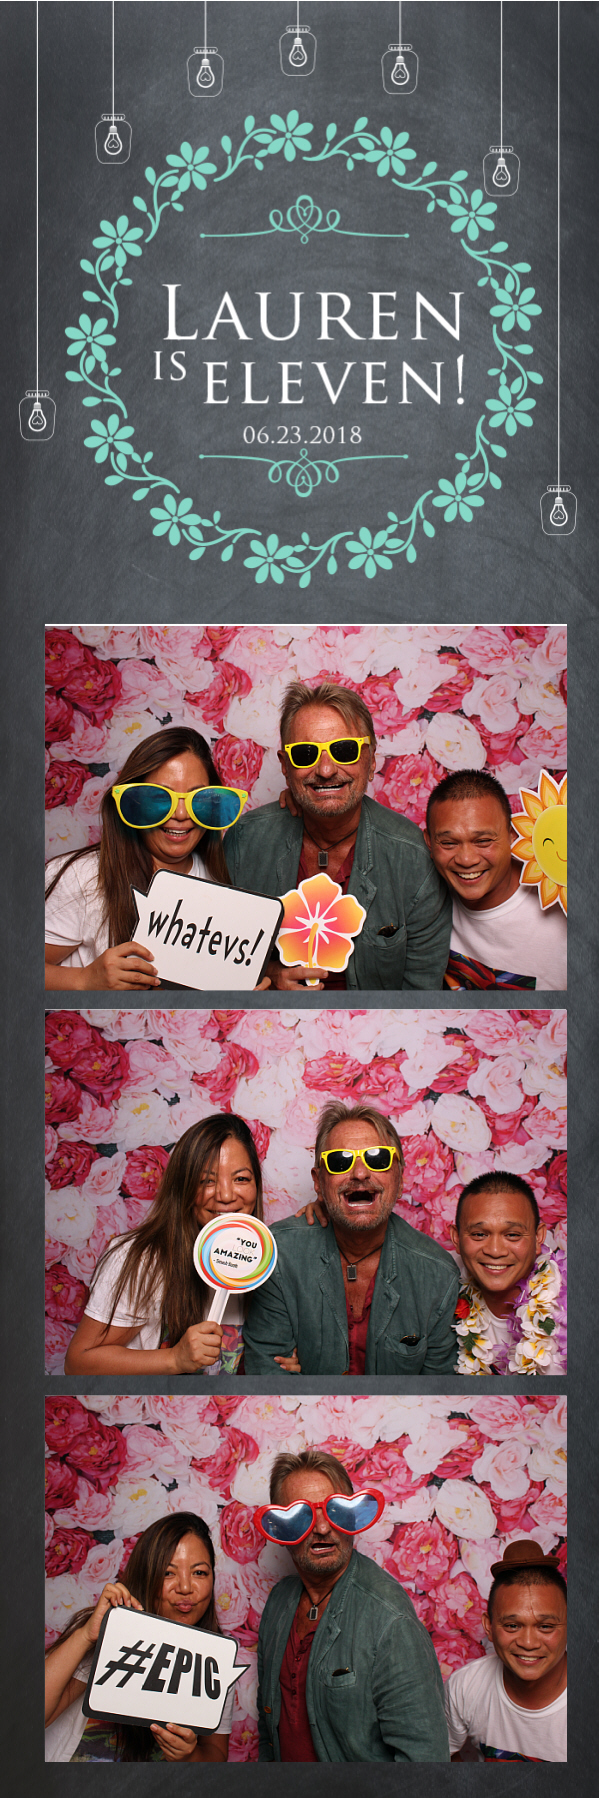 2x6 photo strip with group with props sunglasses in front of rose wall backdrop